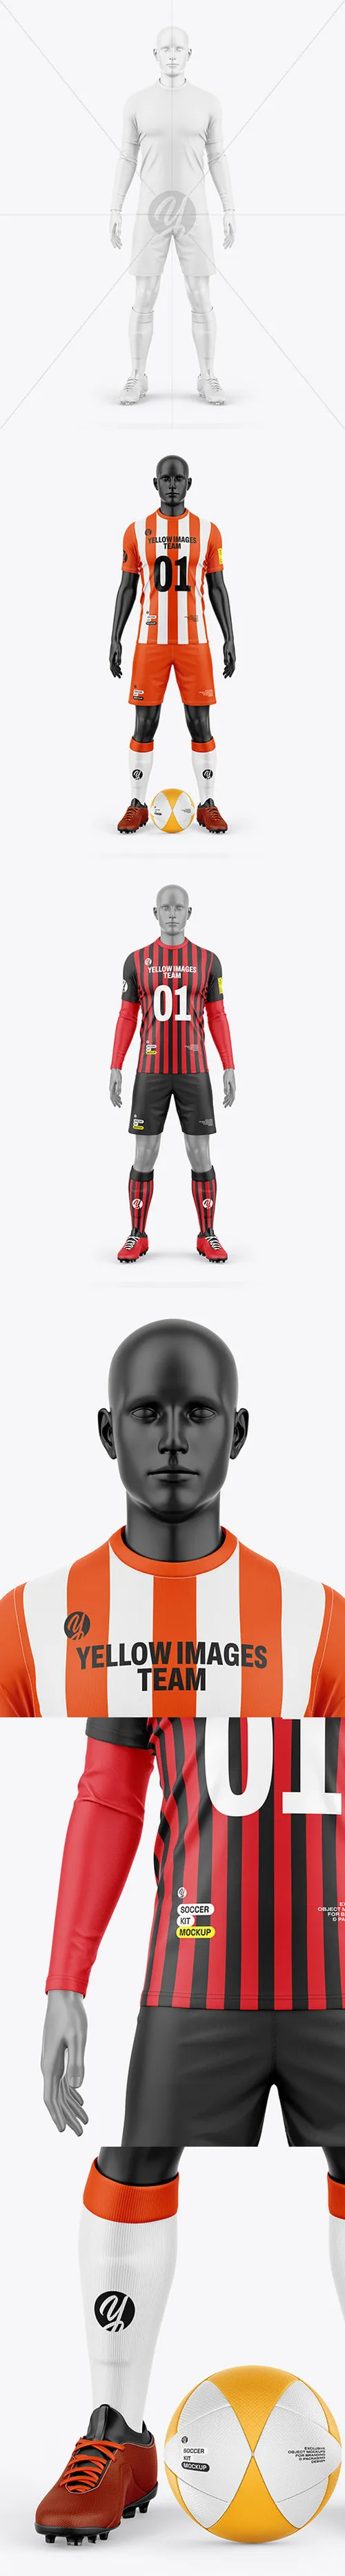 Soccer Kit w/ Mannequin Mockup - Front View 133236